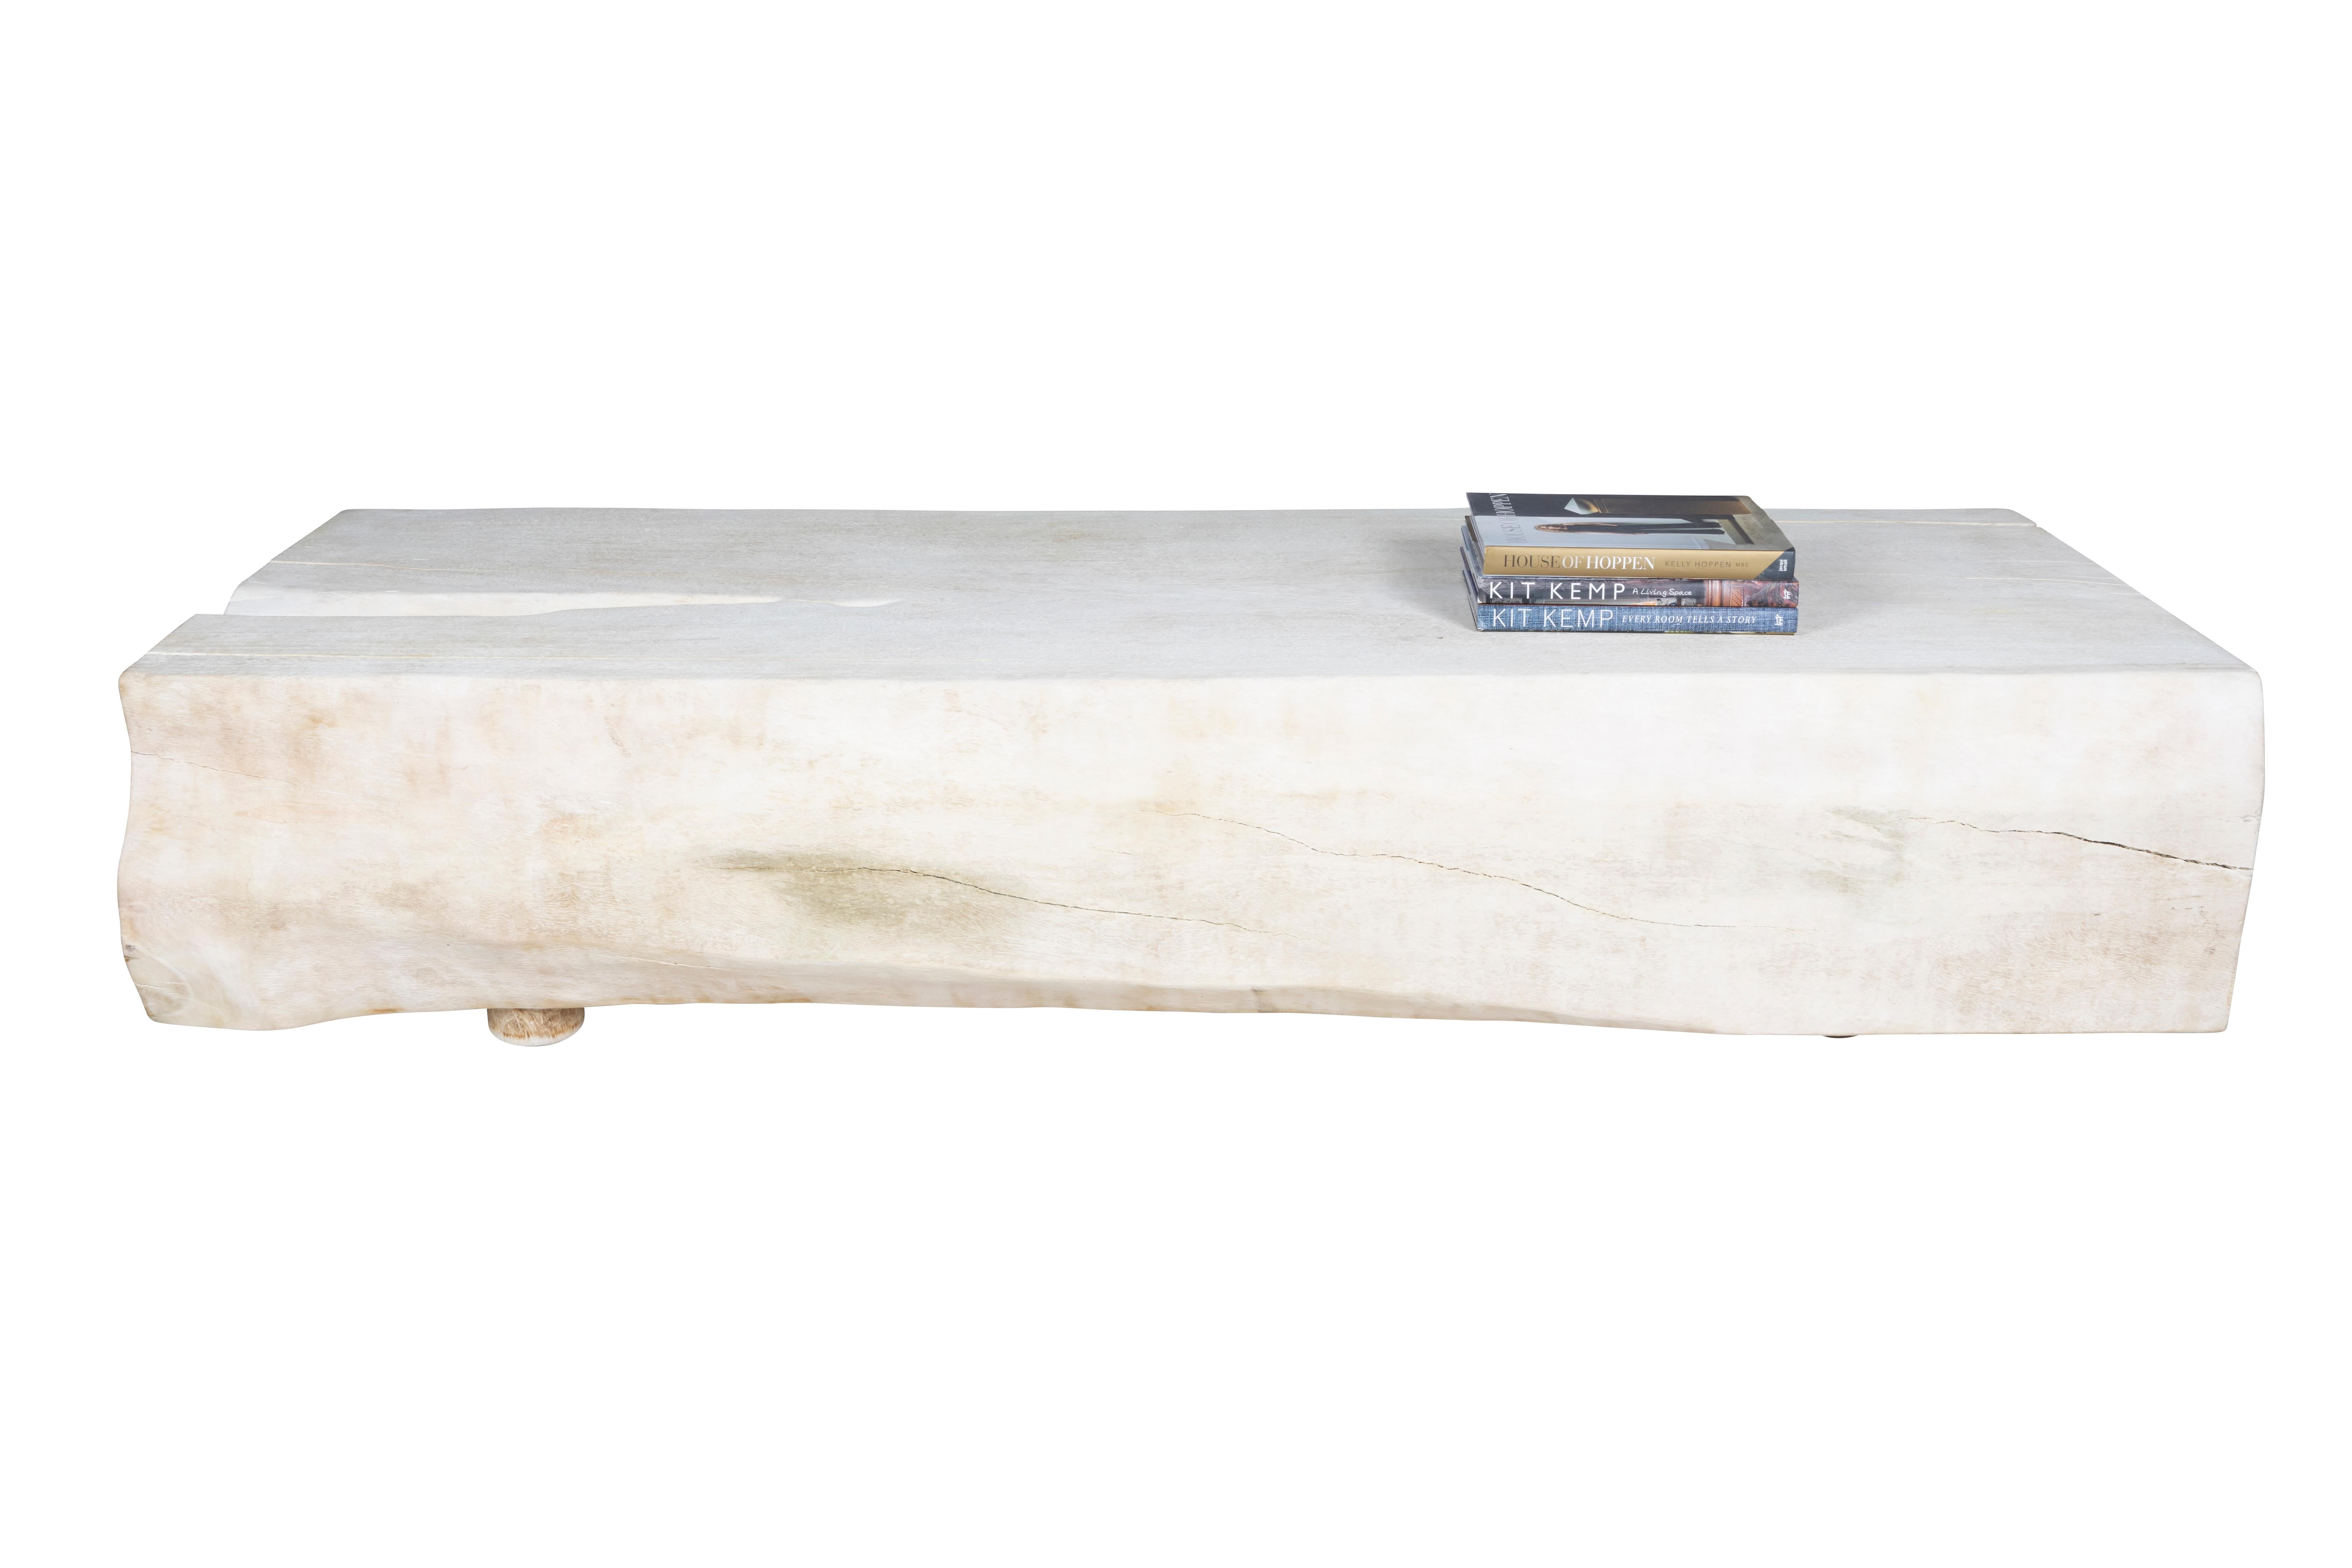 This monumental bleached coffee table is built from one single block of lychee hardwood. The top is flattened, sanded, and then bleached to compliment the wood's naturally rich texture and rustic patterns. The sides are kept in their natural organic